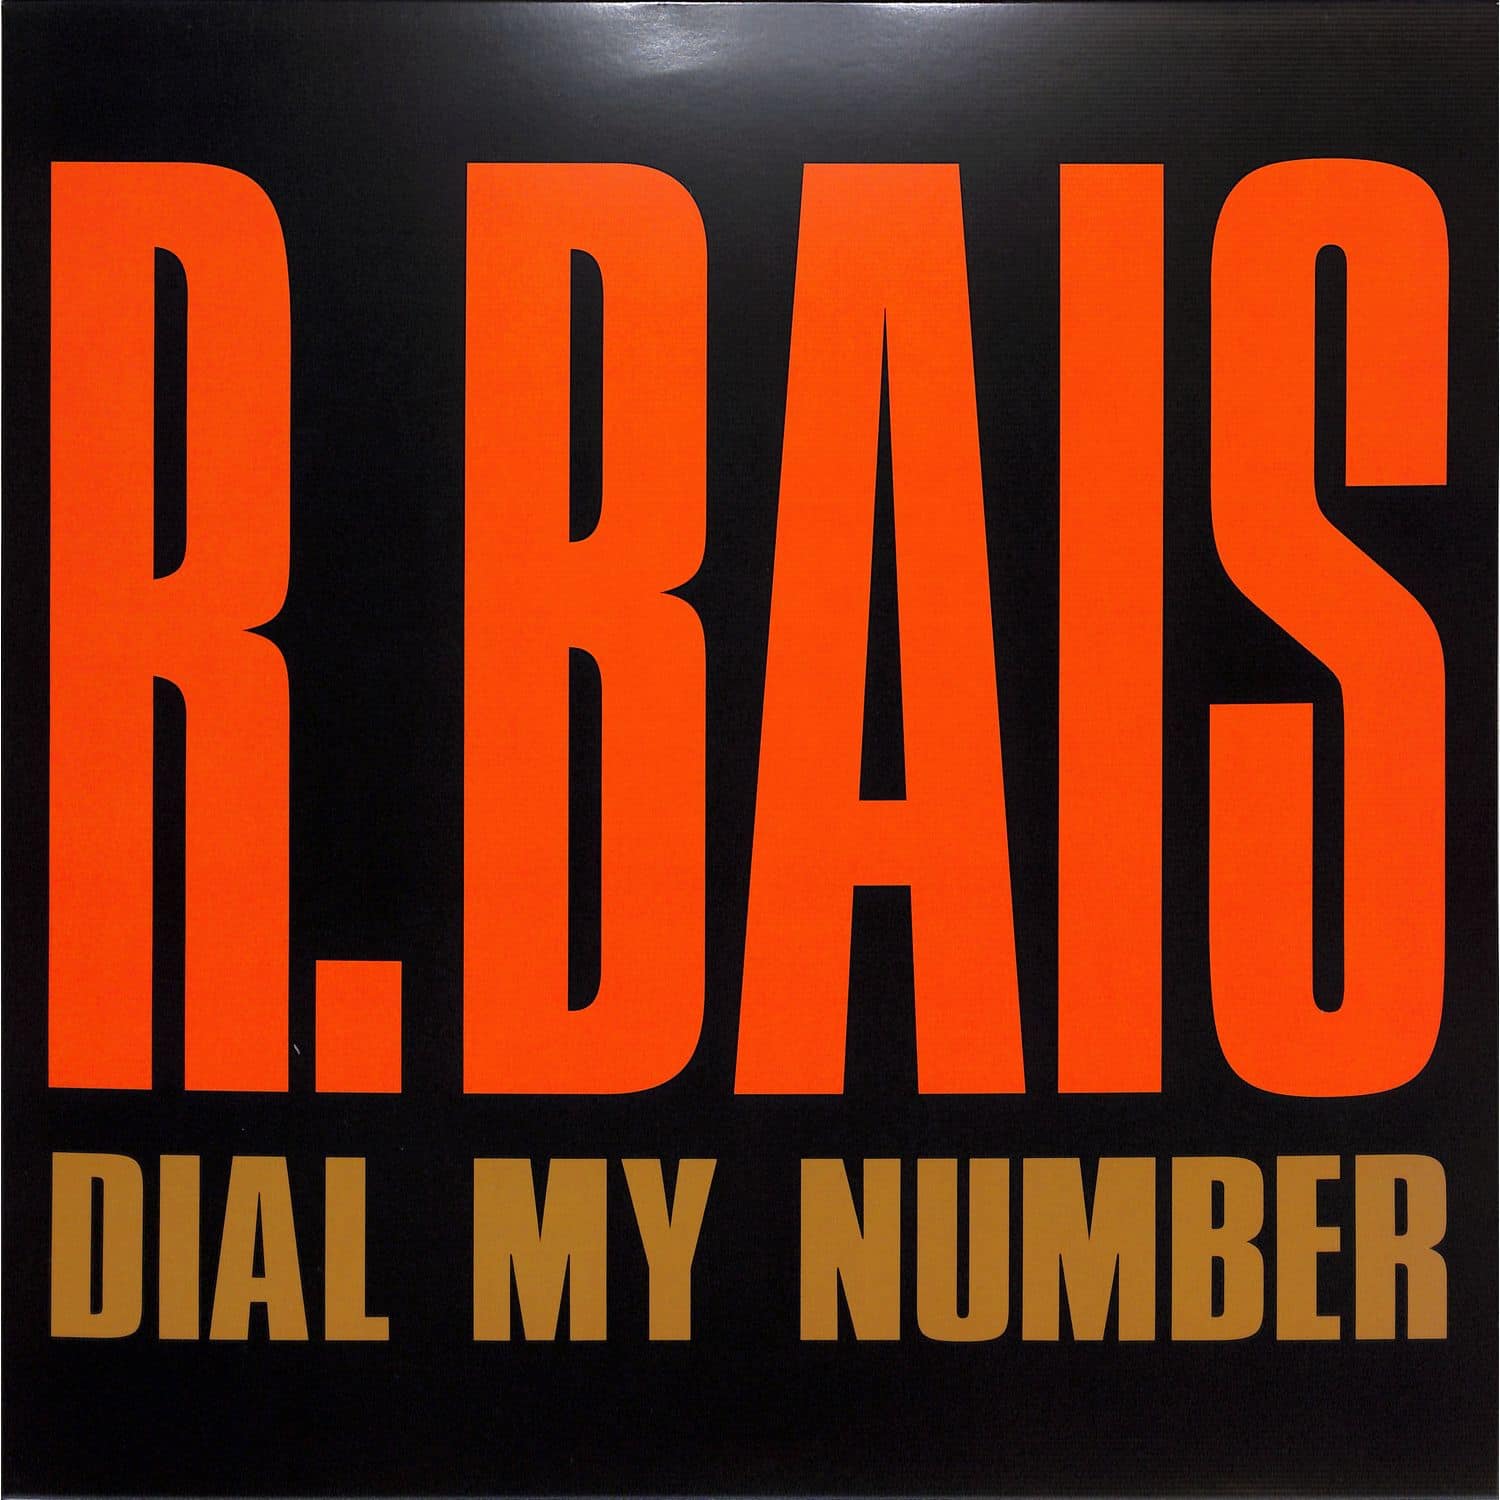 R. Bais - DIAL MY NUMBER